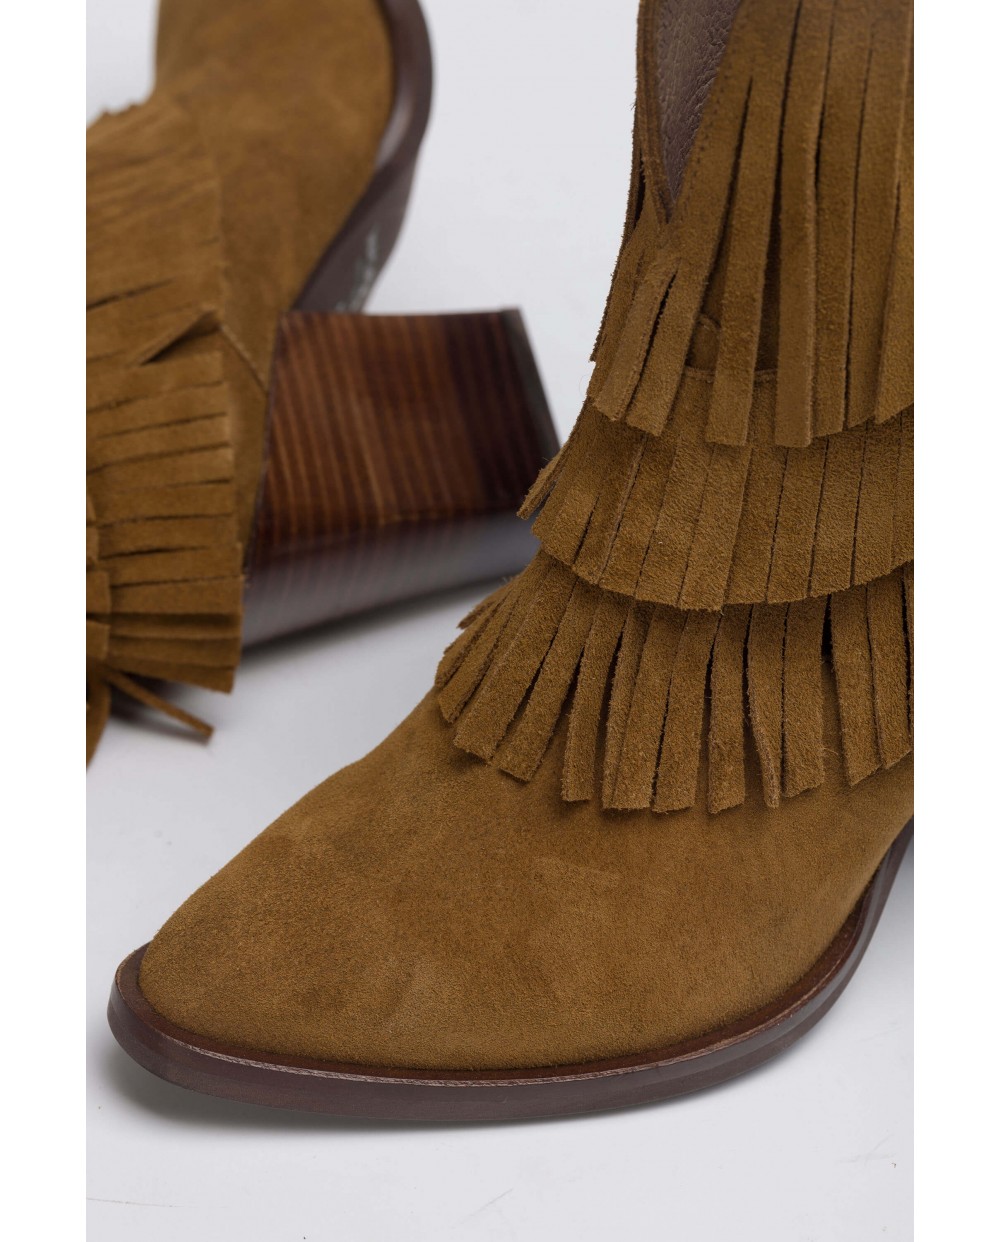 Wonders-Ankle Boots-Montana fringe ankle boot